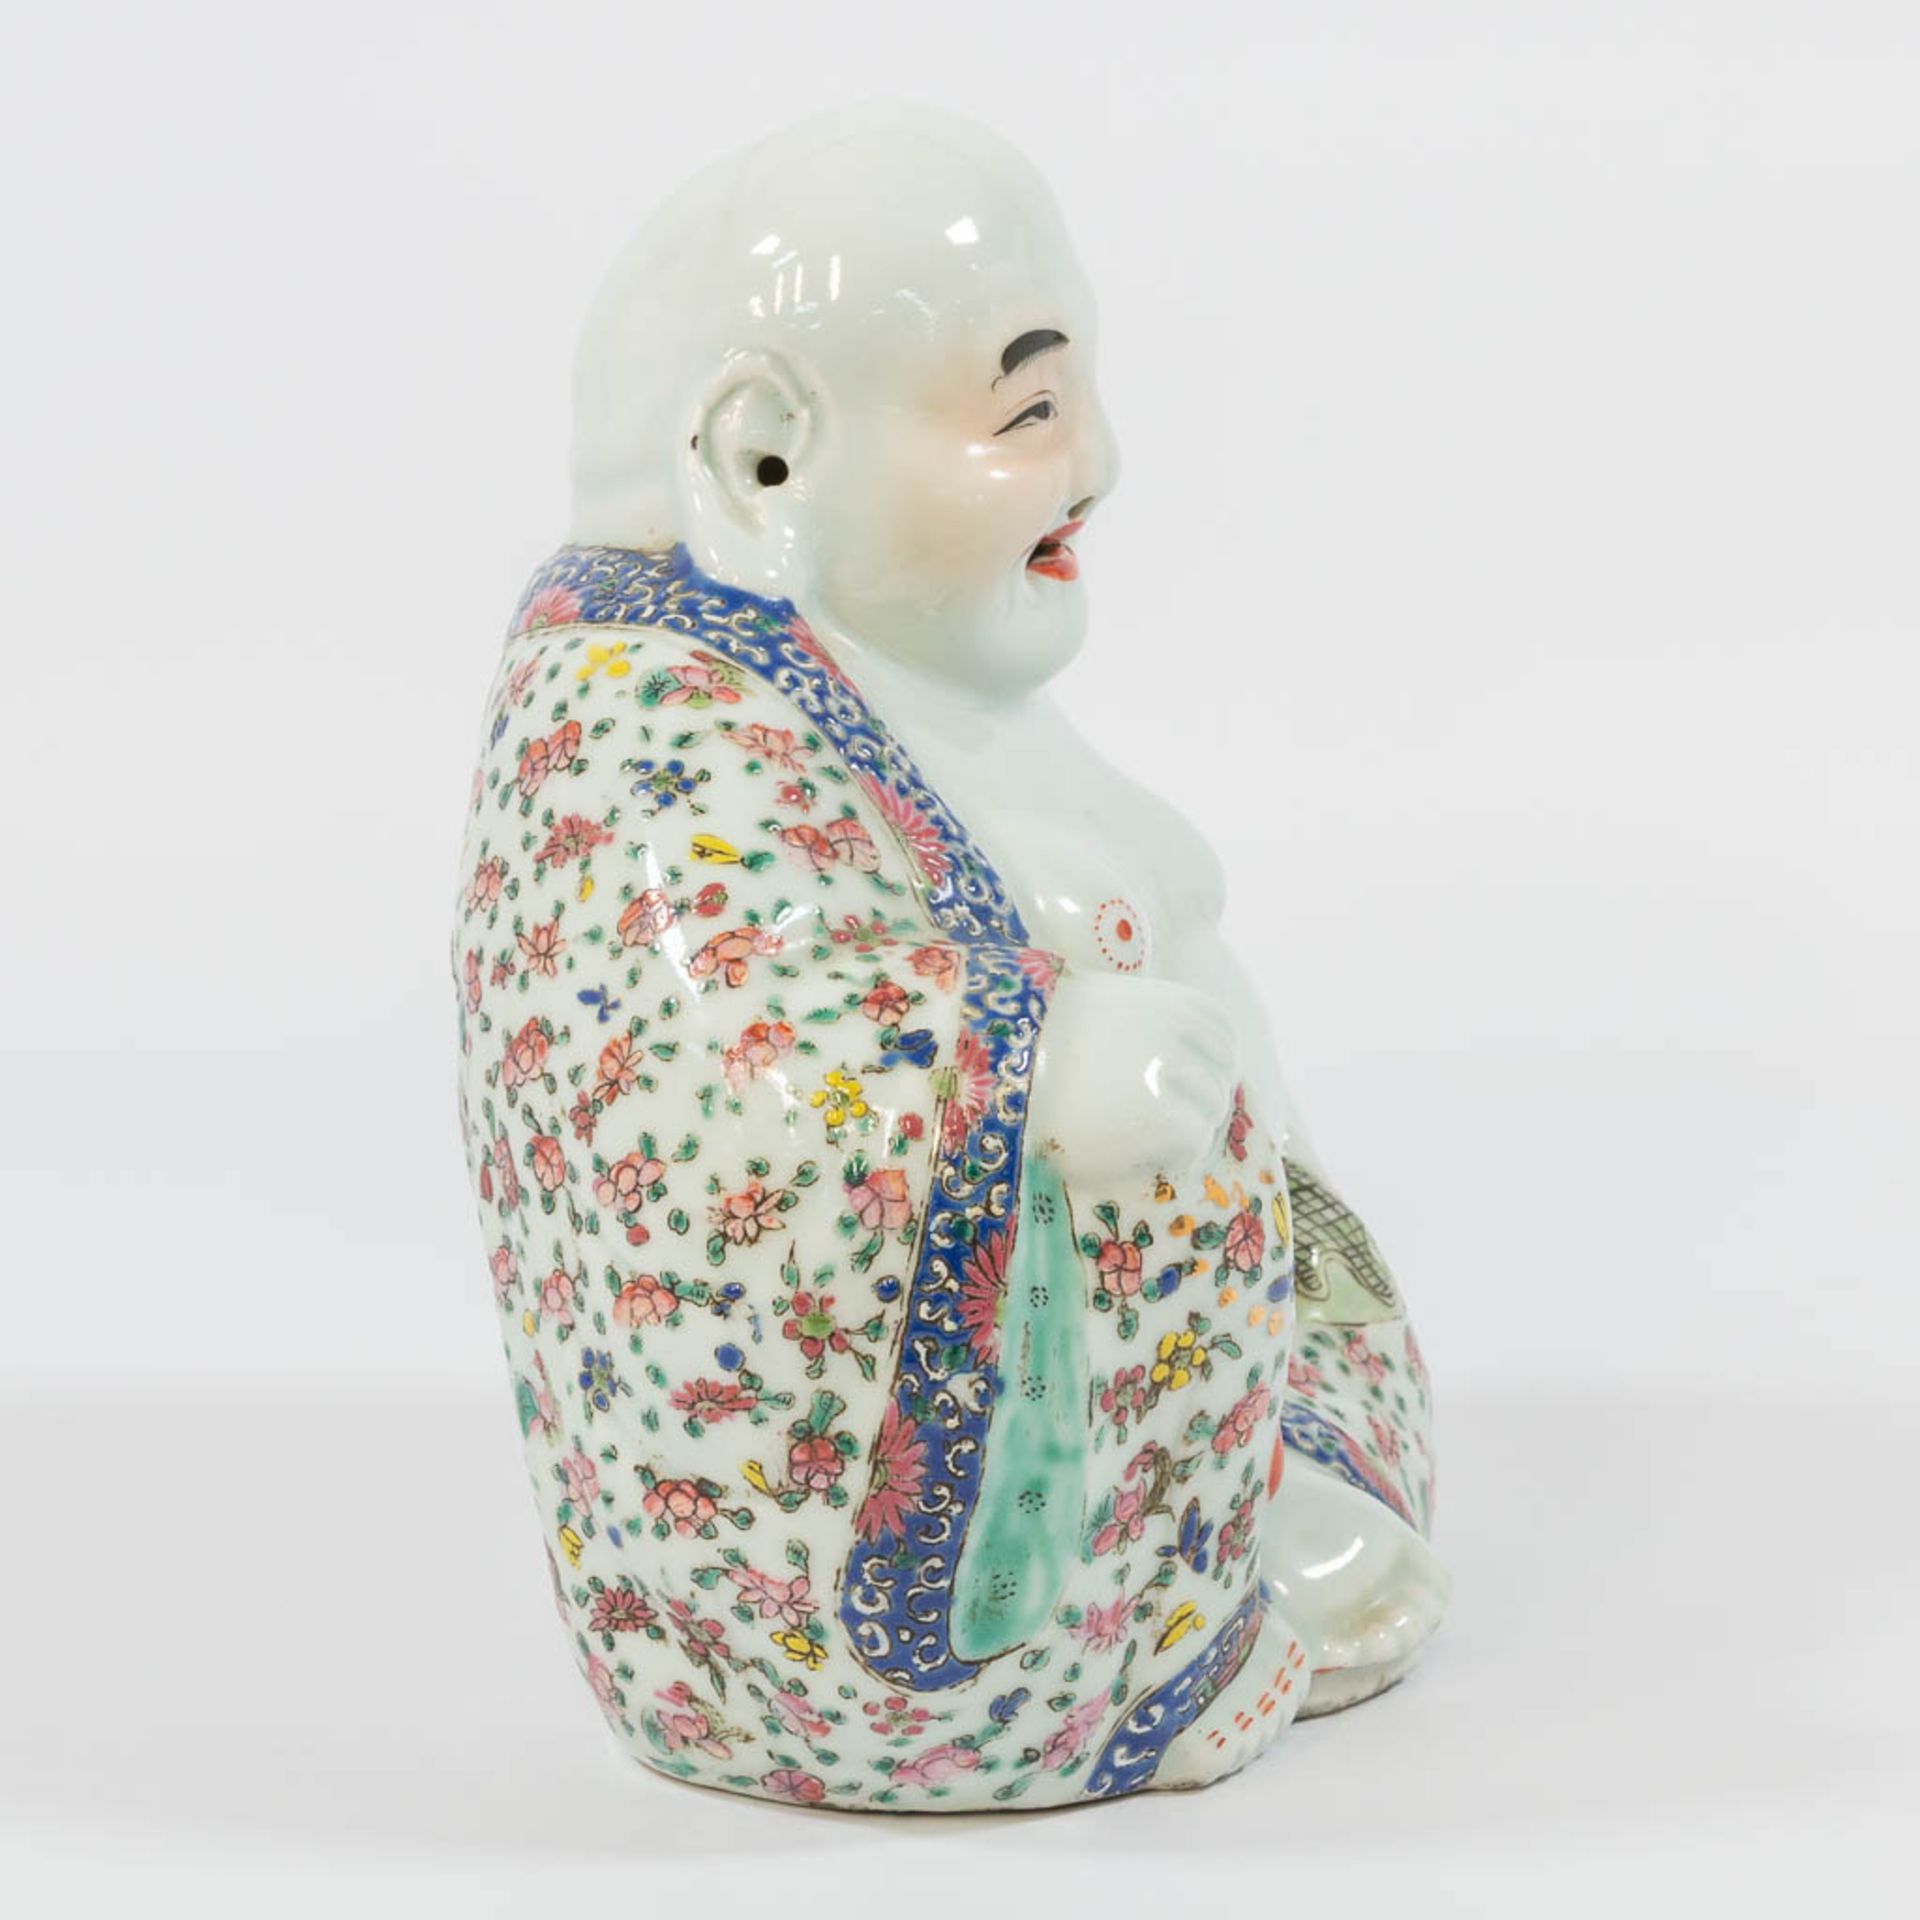 A Chinese laughing buddha, made of porcelain. - Image 5 of 27